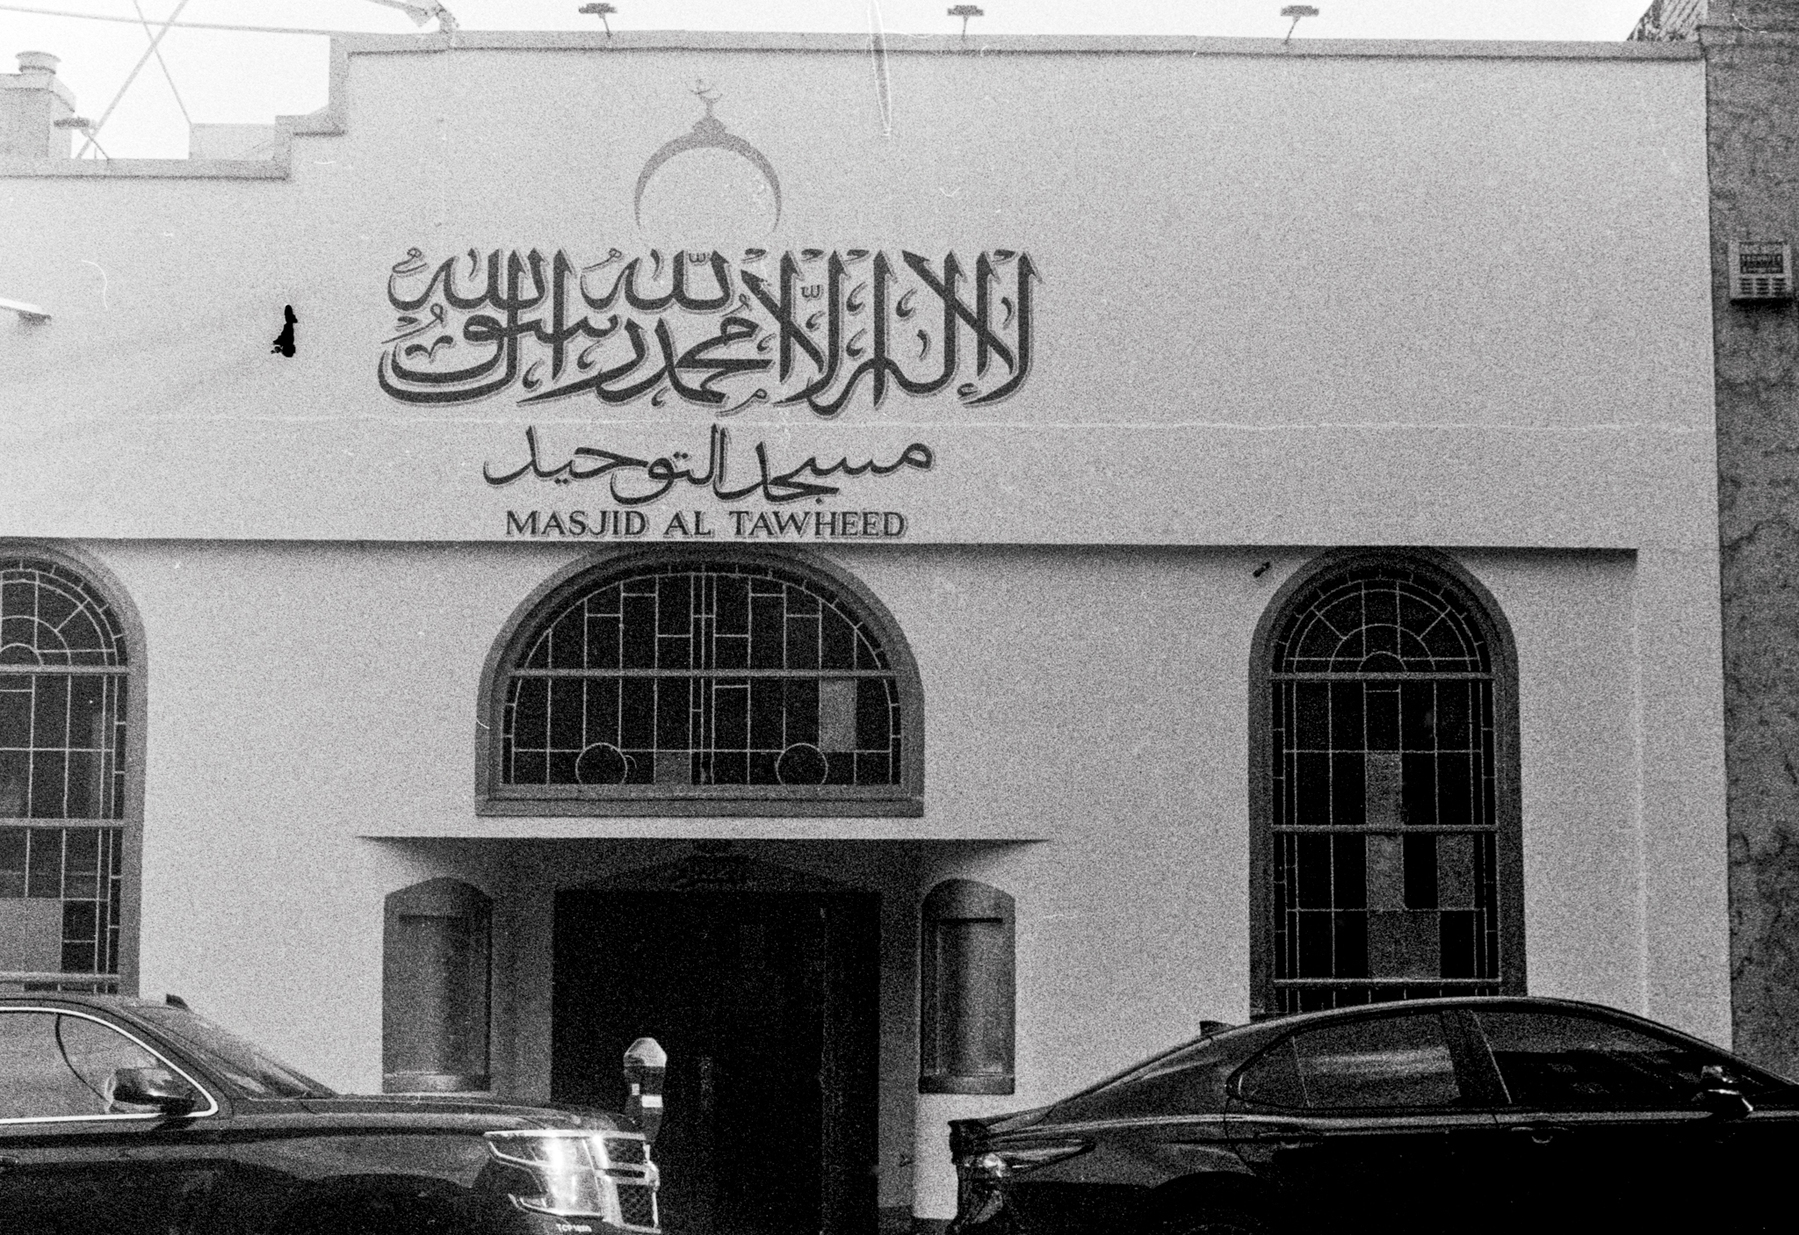 a scan of a black and white photo showing a mosque in San Francisco with the name Masjid Al Tawheed